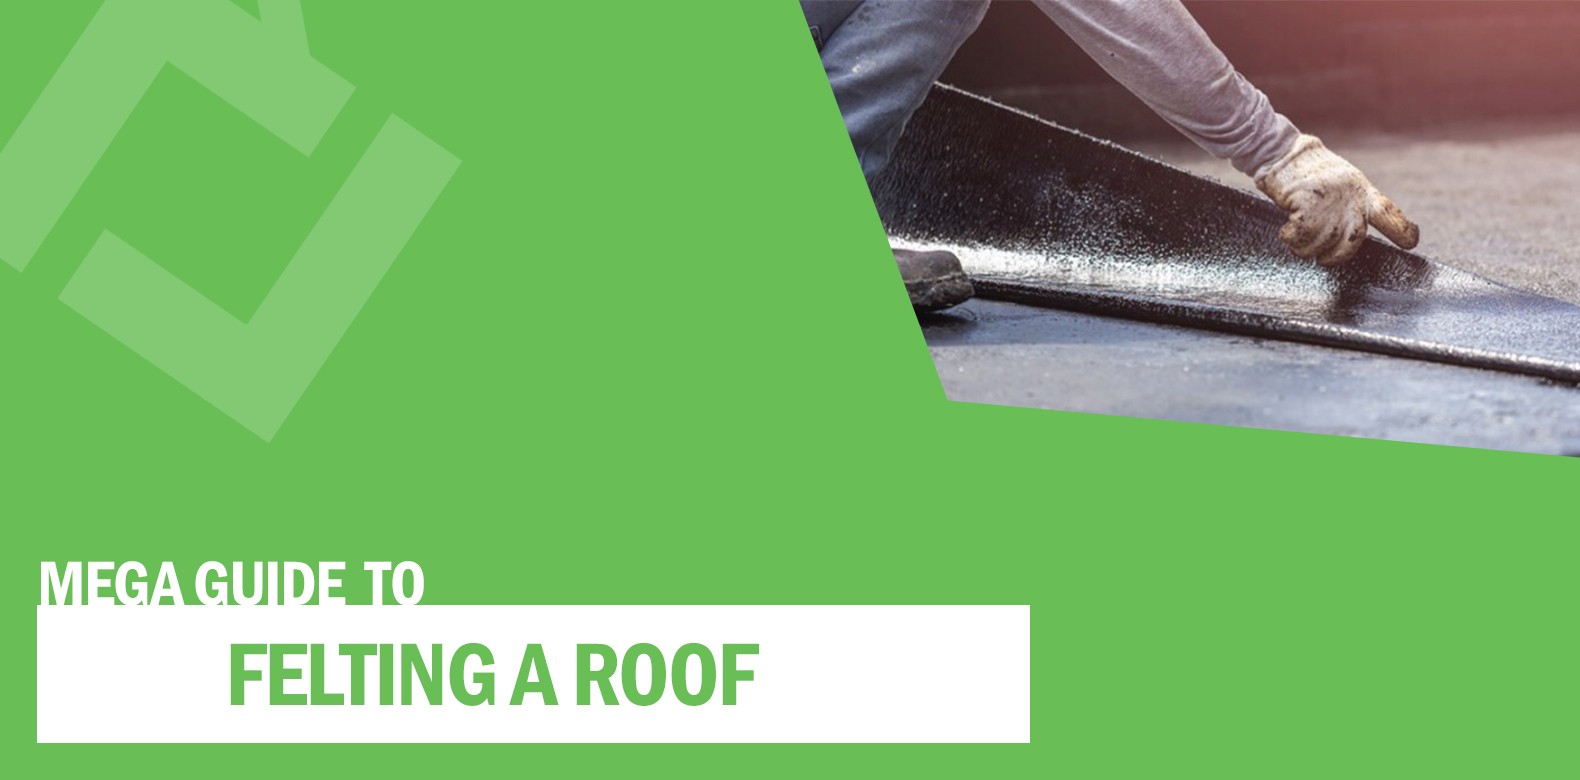 Mega Guide to Felting a Roof